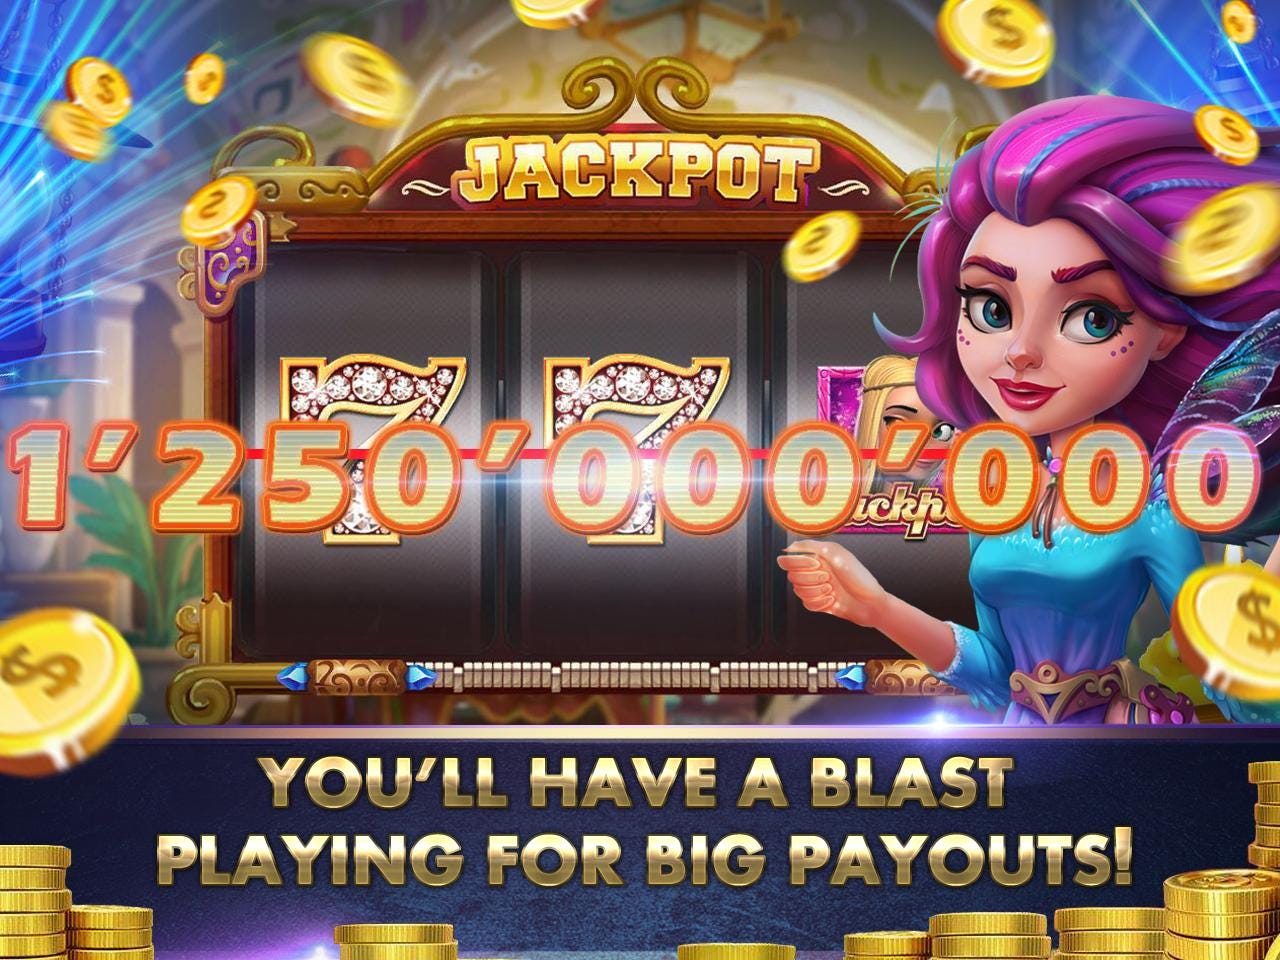 Free slots games to play offline